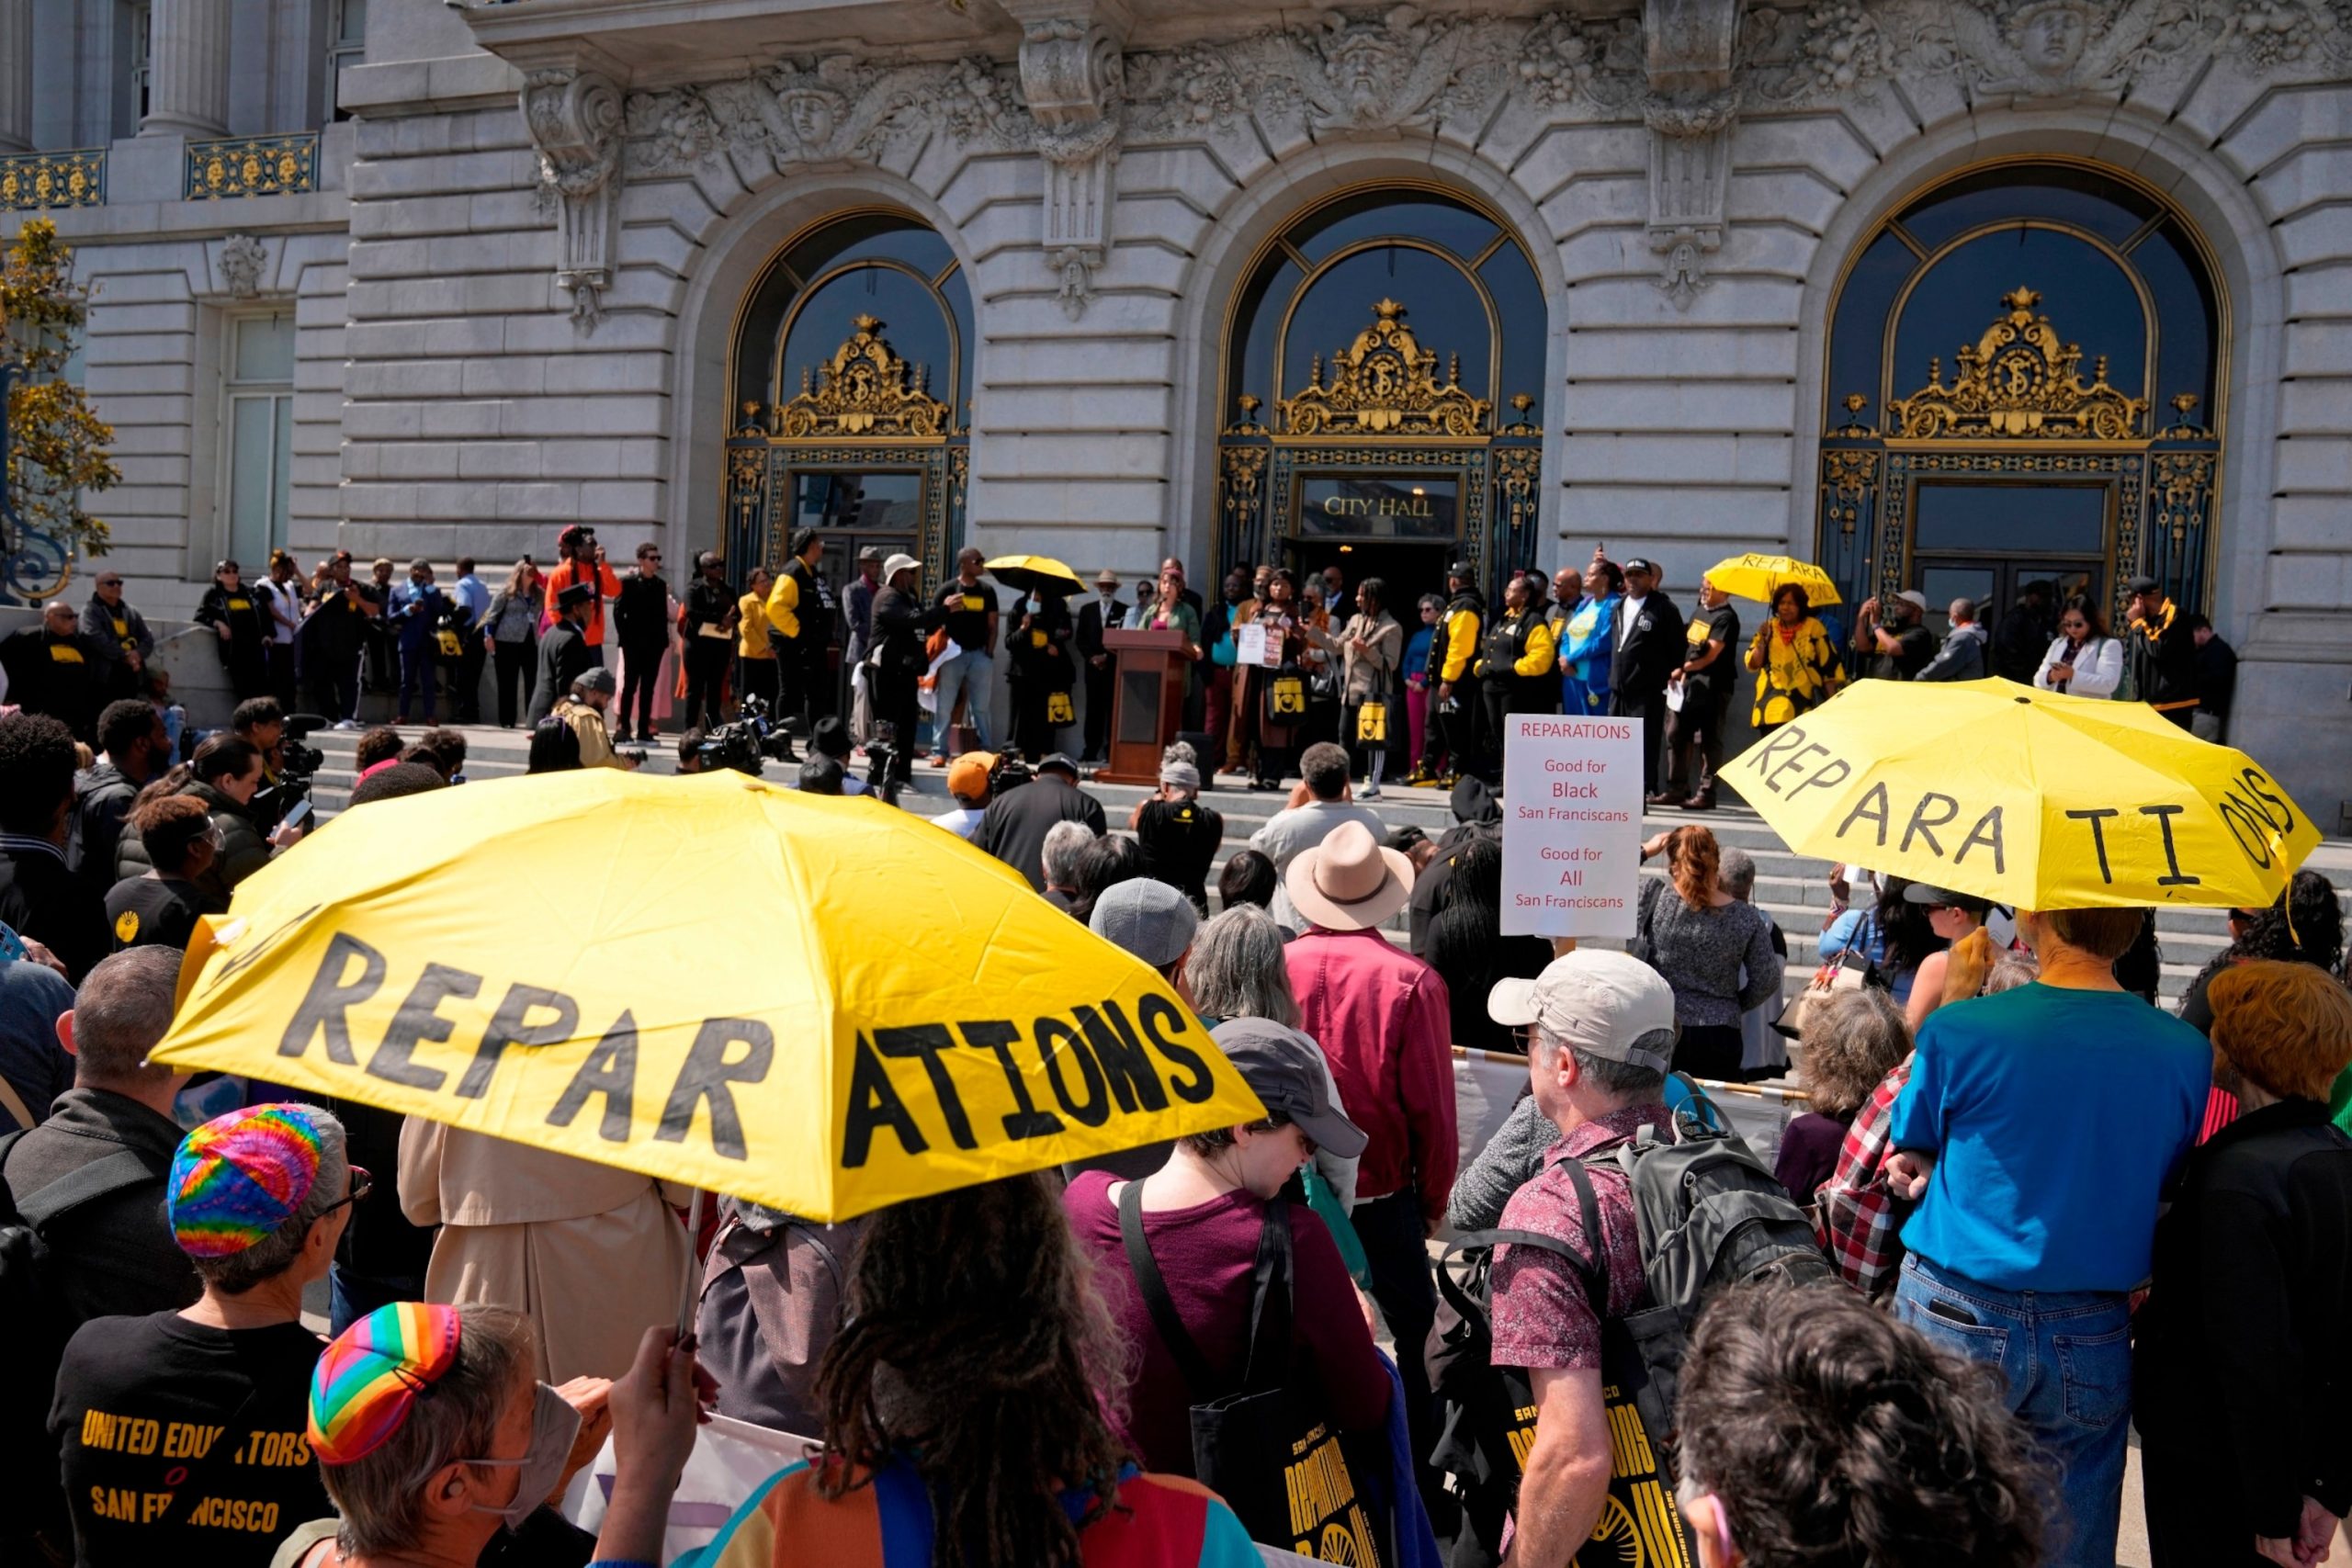 San Francisco issues formal apology to Black residents for systemic discrimination